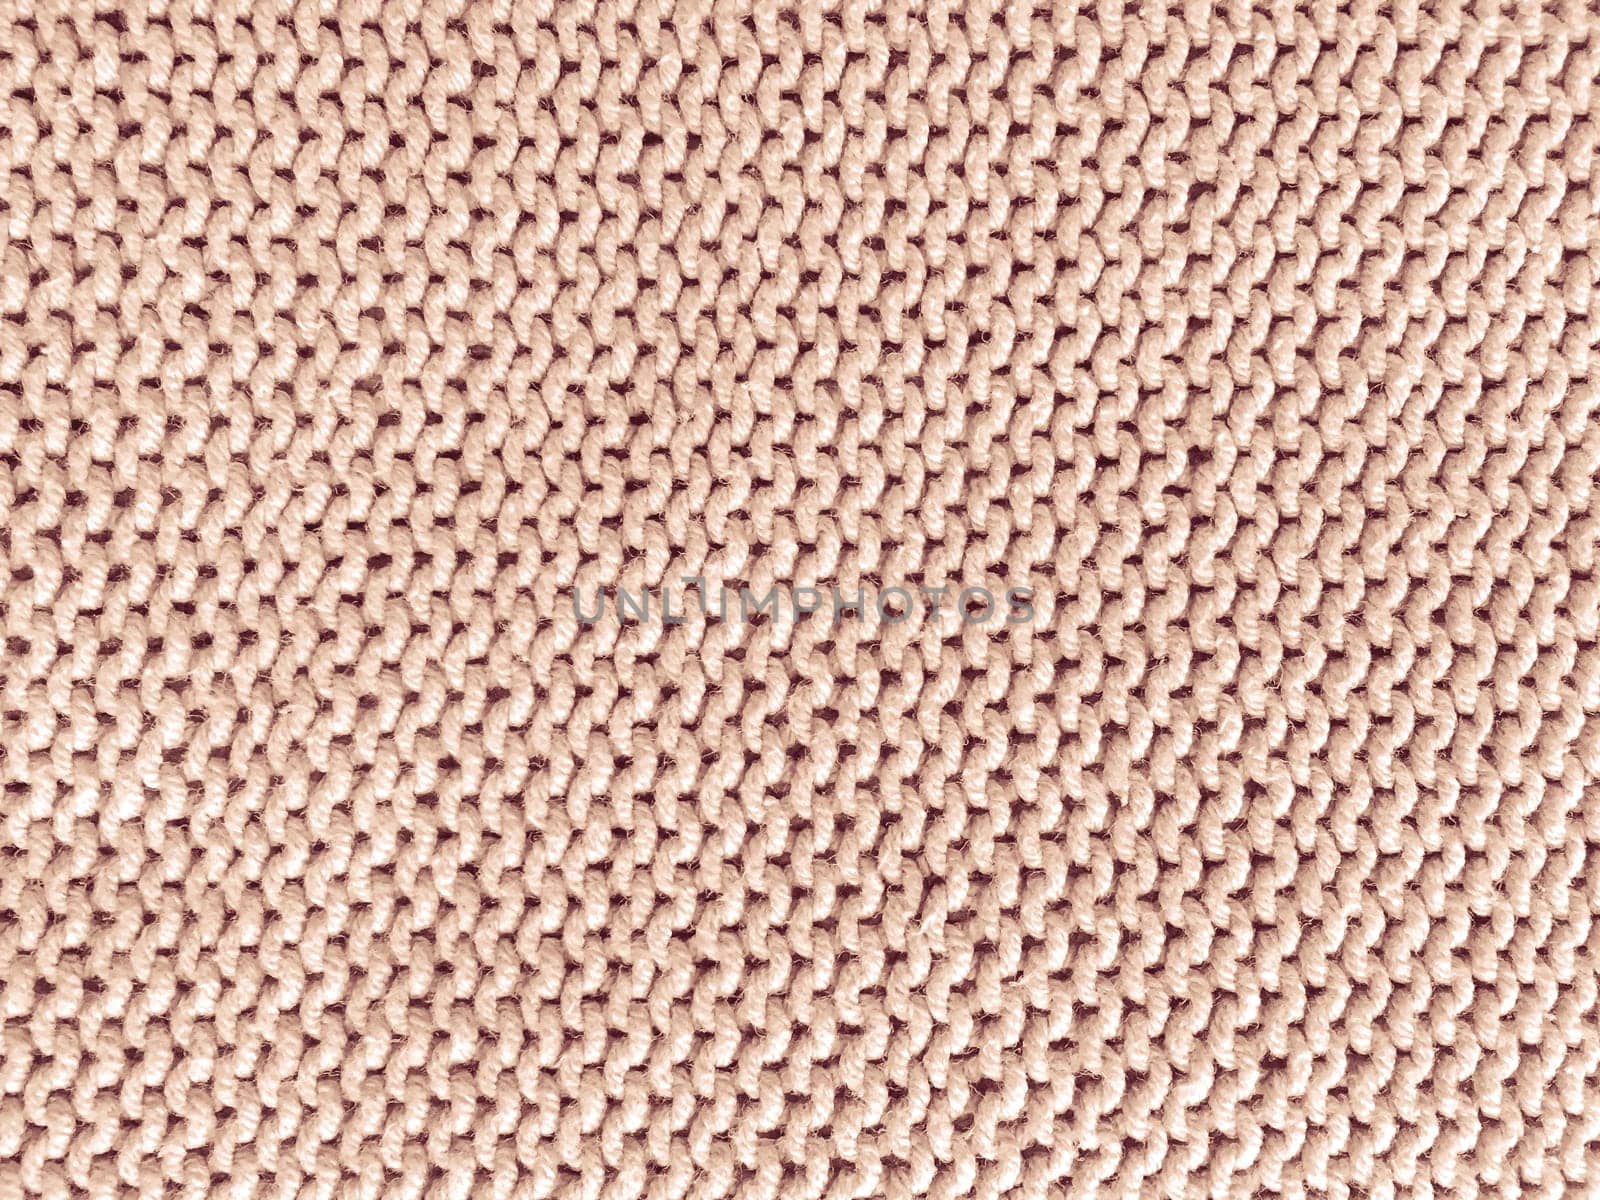 Beige Texture Knitted Fabric. Holiday Wool Ornament. Knitwear Cotton Background. Woven Fabrics. Nordic Weave Wallpaper. Vintage Linen Thread. Abstract Handmade Cloth. Jacquard Knitting.